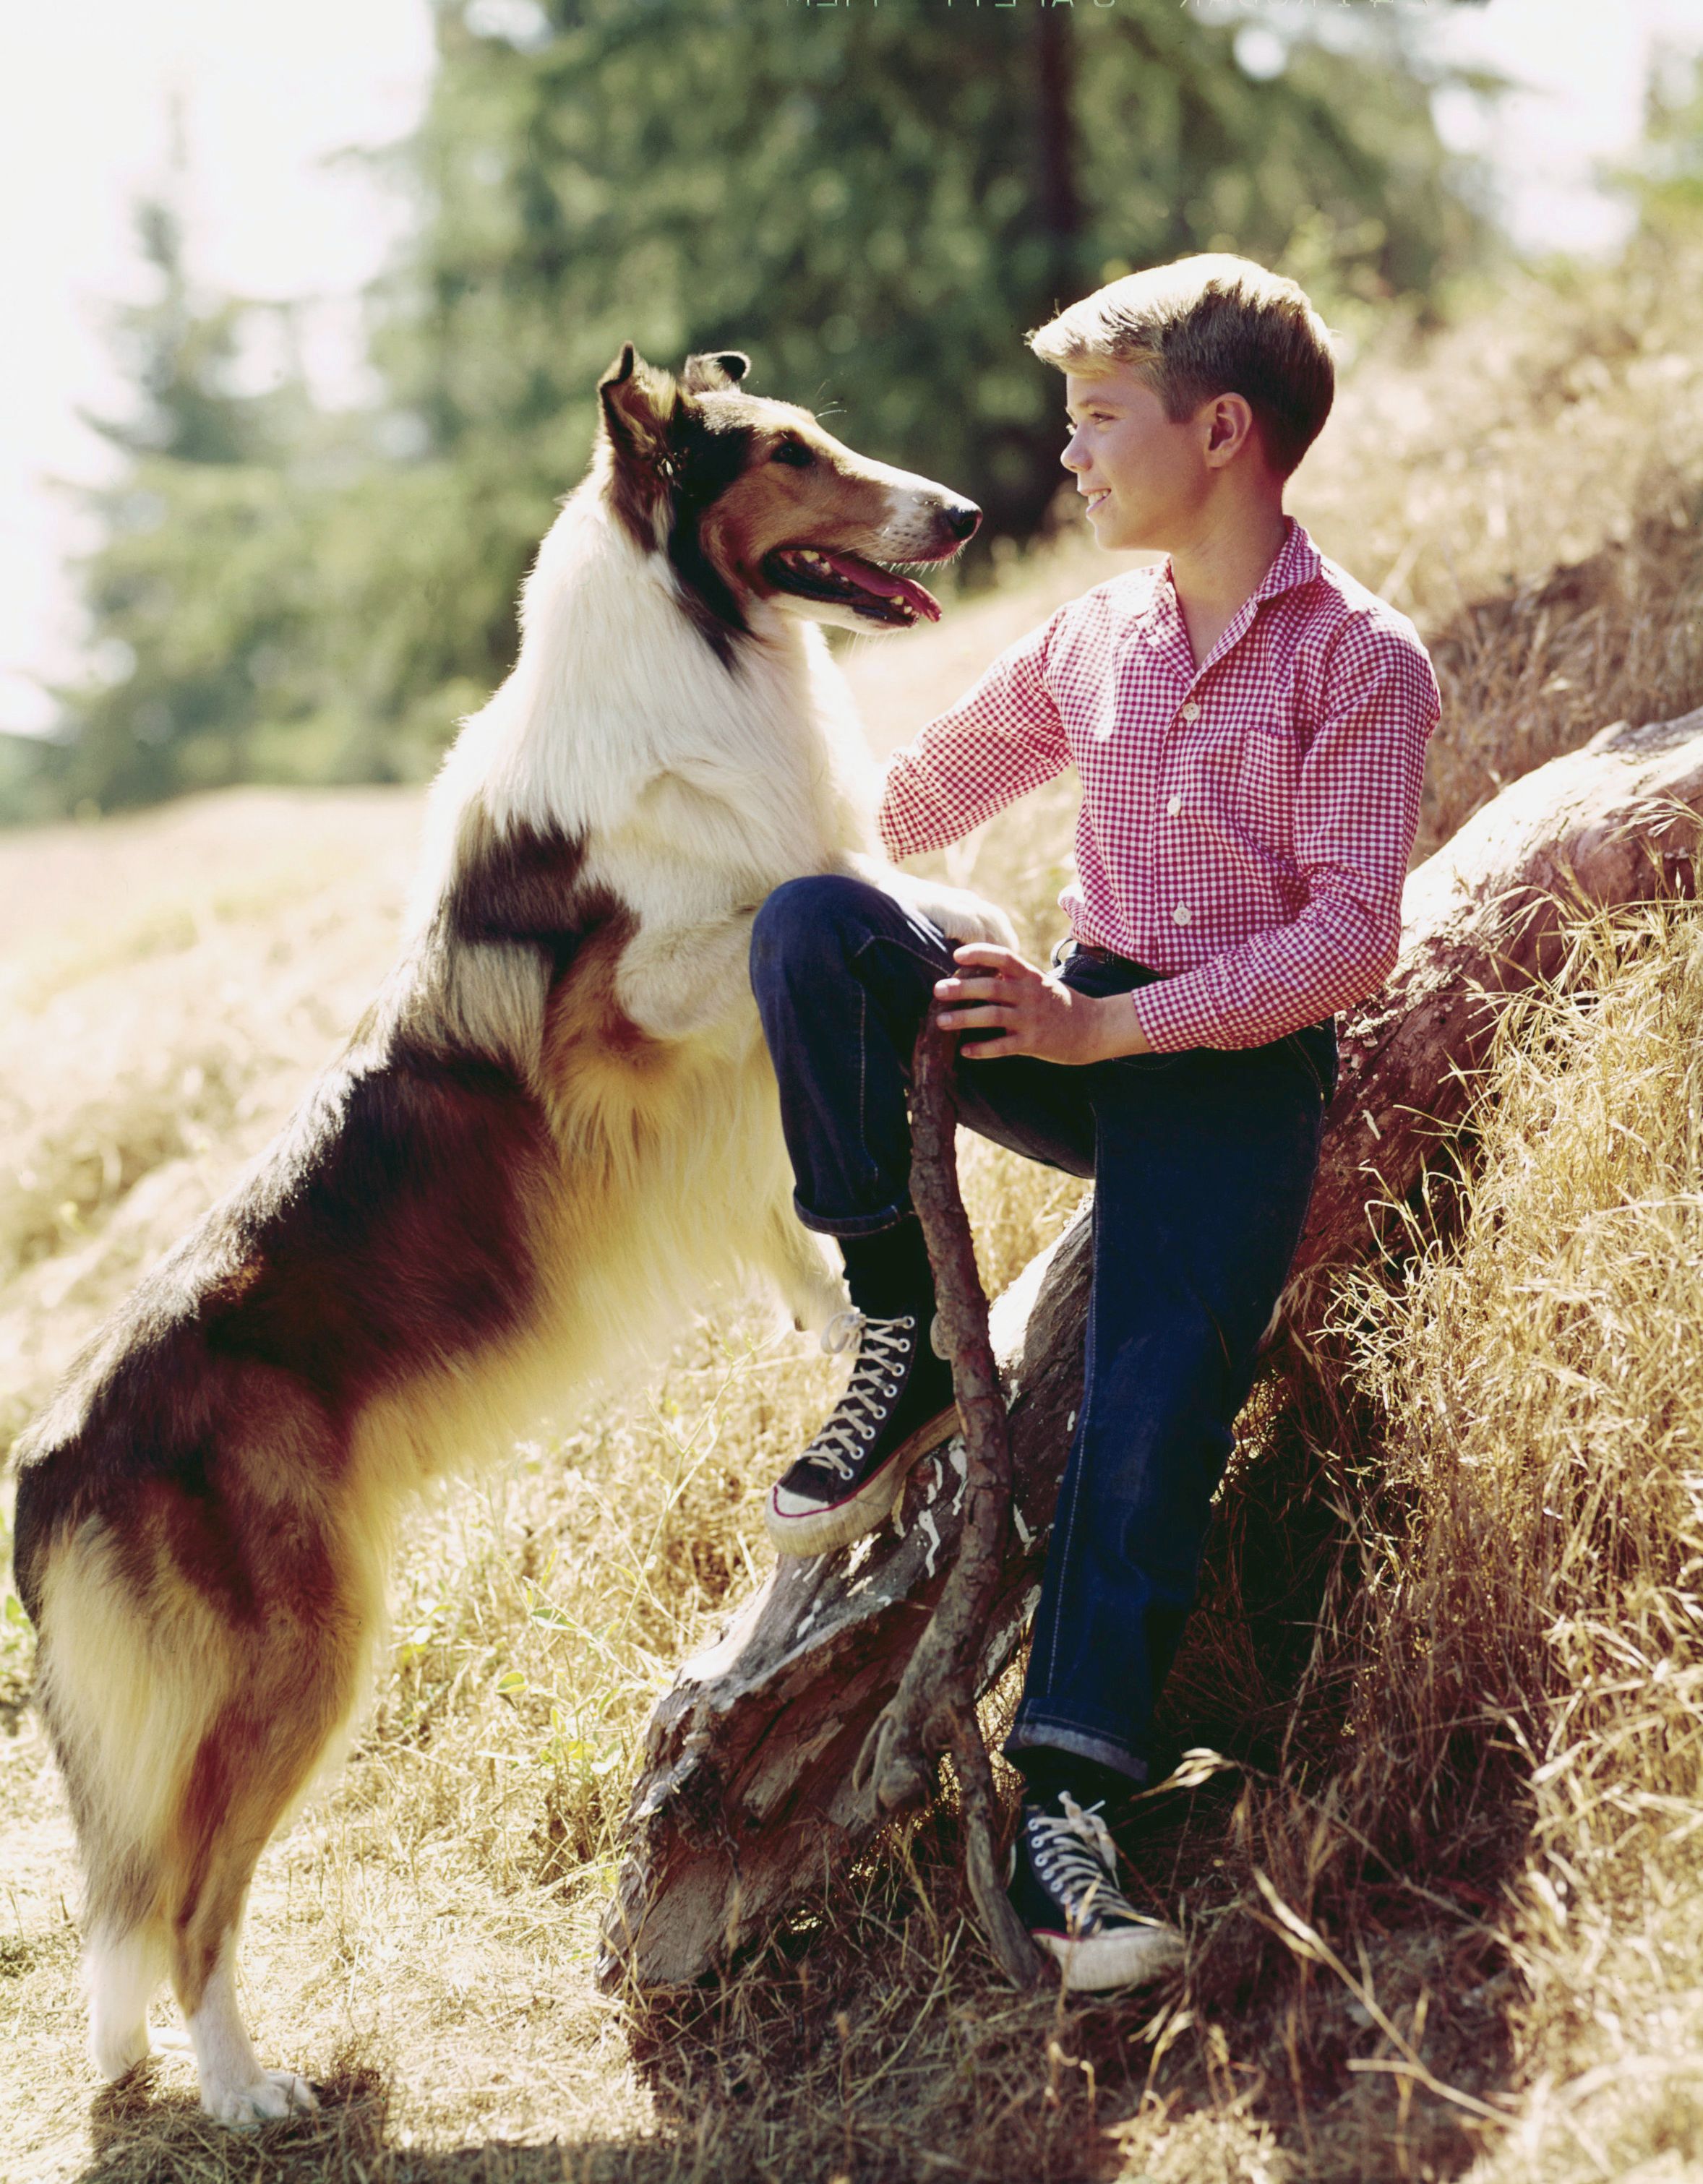 Baby the dog, as Lassie. and Jon Provost, as Timmy Martin, in a promotional still for the television show "Lassie," in 1960. | Source: CBS Photo Archive/Getty Images